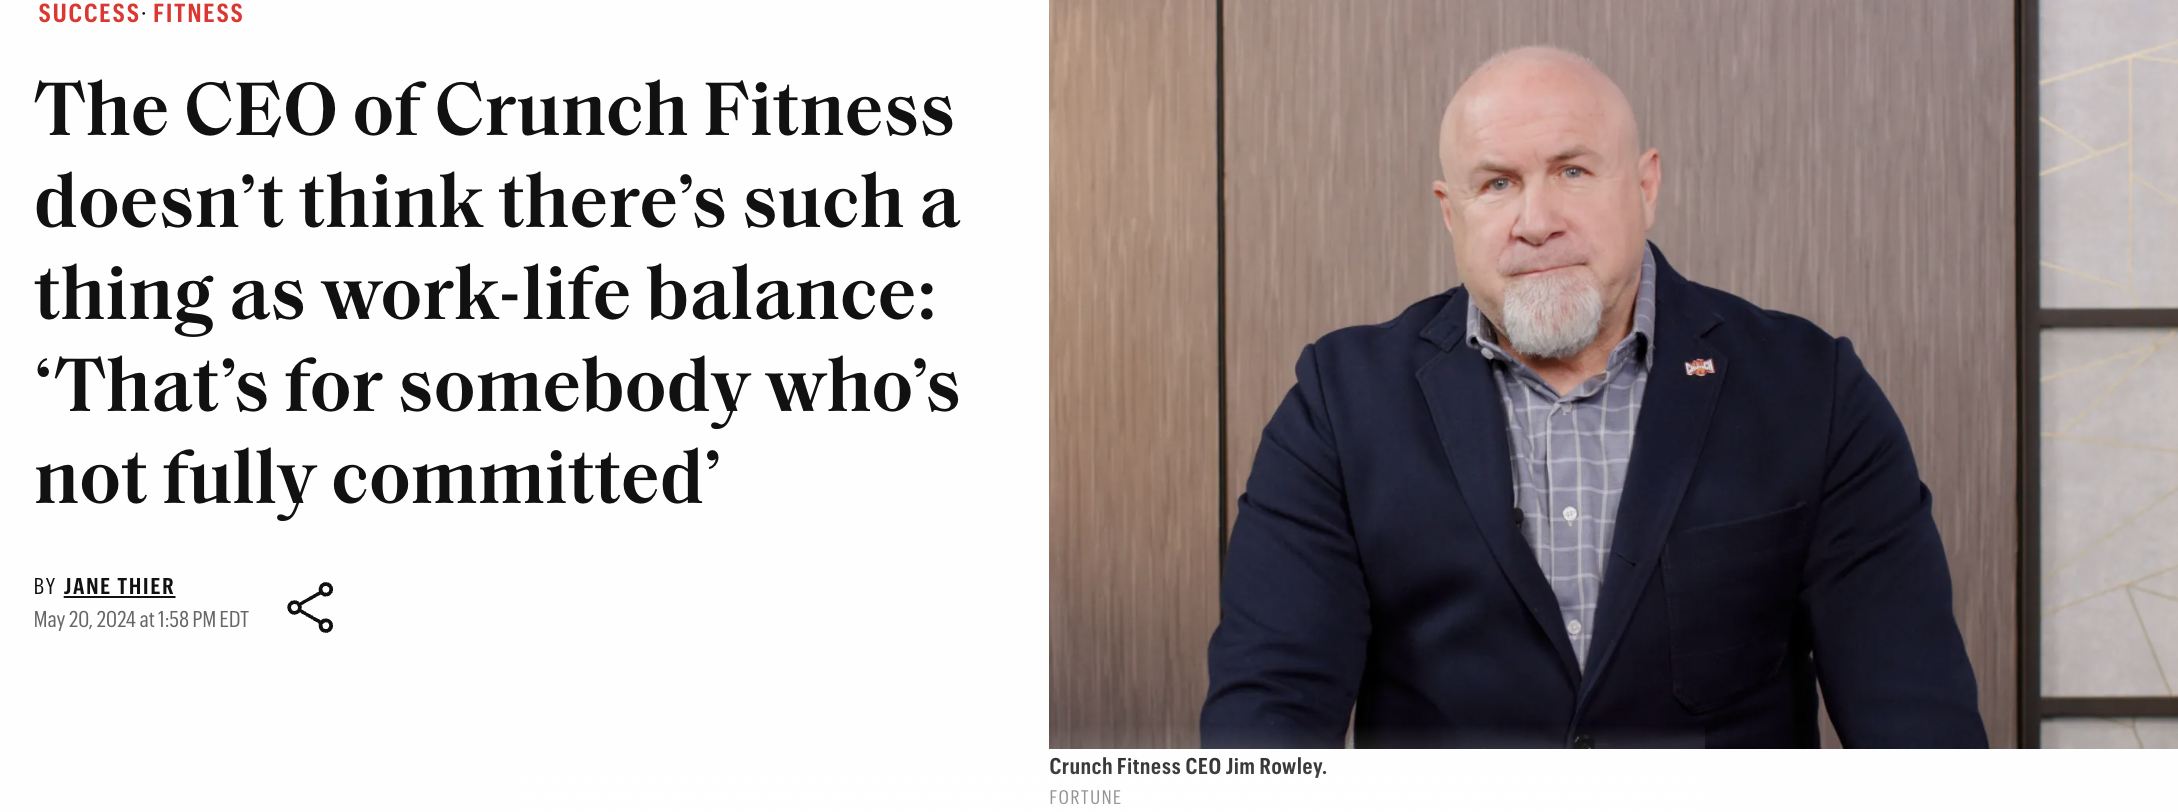 gentleman - Success Fitness The Ceo of Crunch Fitness doesn't think there's such a thing as worklife balance "That's for somebody who's not fully committed' By Jane Thier at 158 Pm Lo Crunch Fitness Ceo Jim Rowley. Fortune